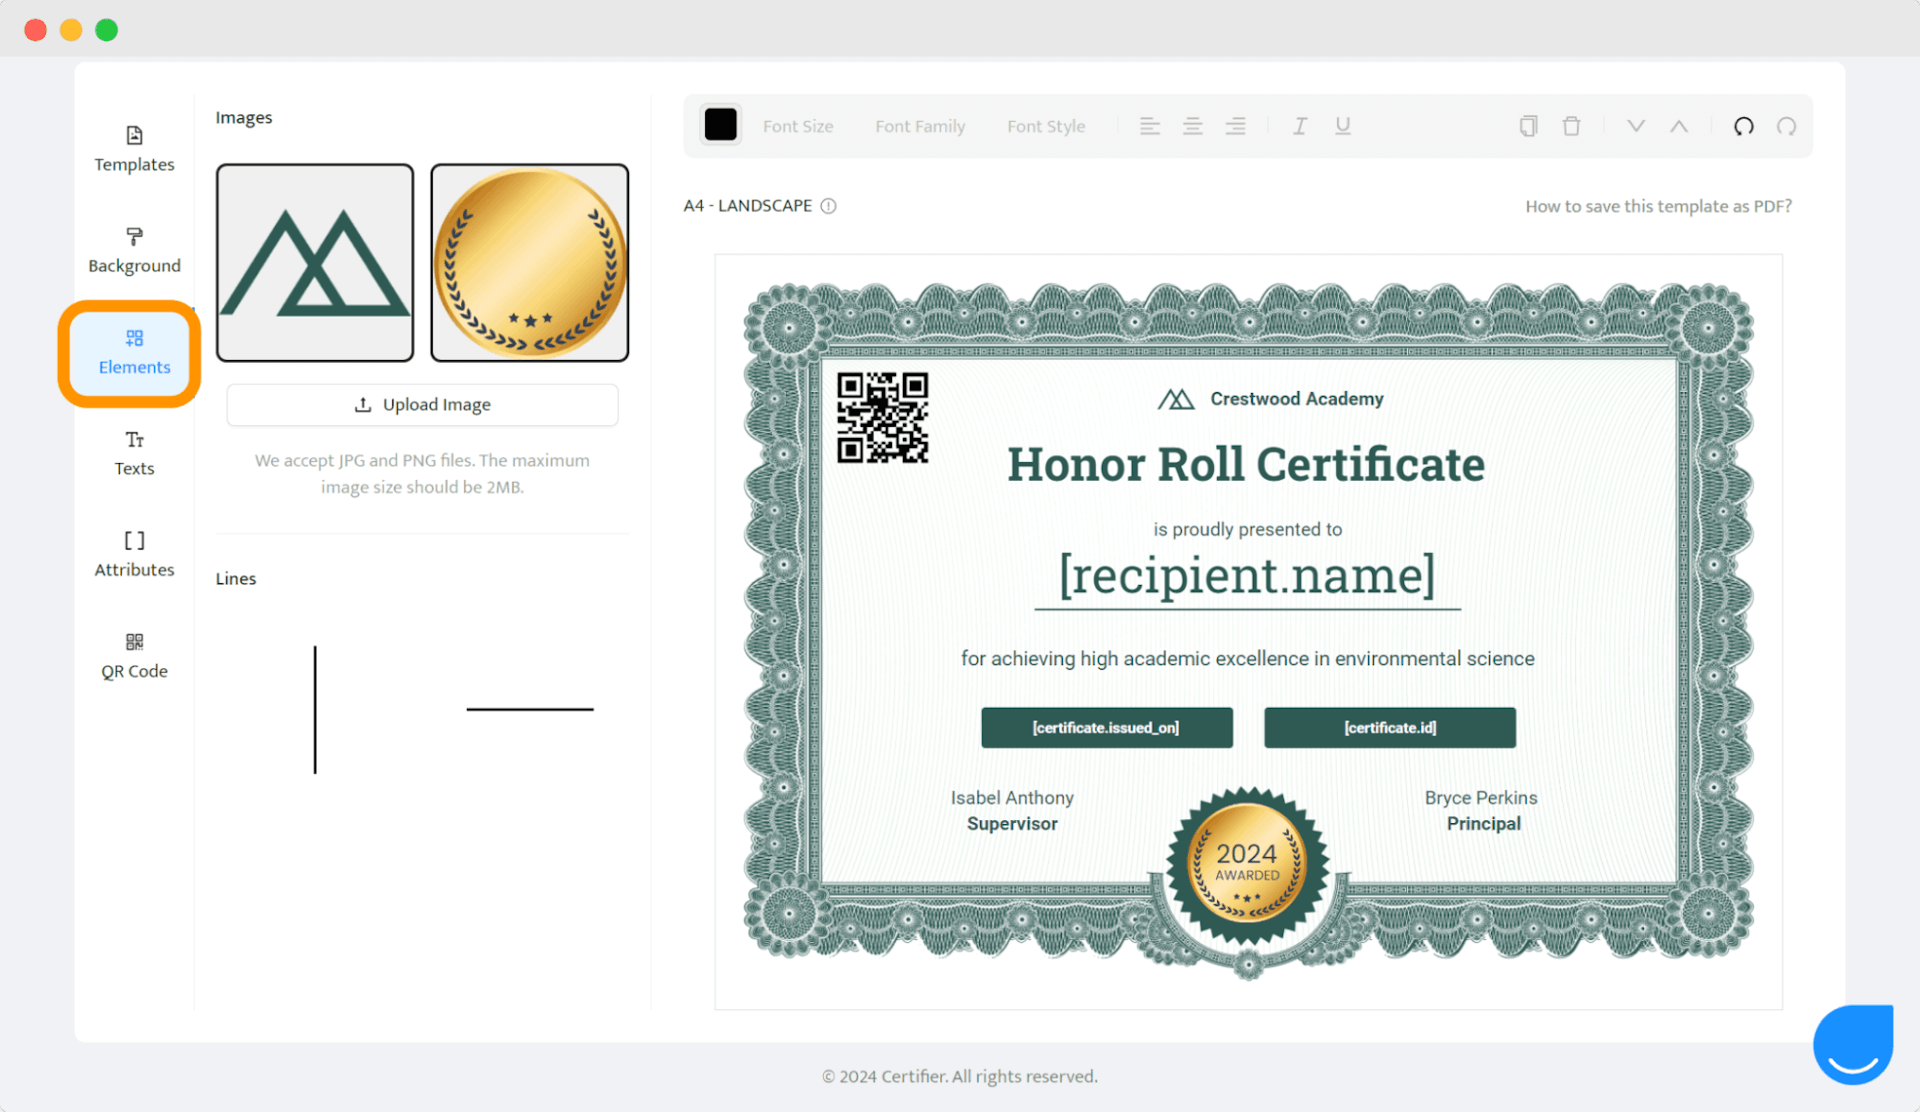 Certifier’s credential builder where you can create with honors certificate.